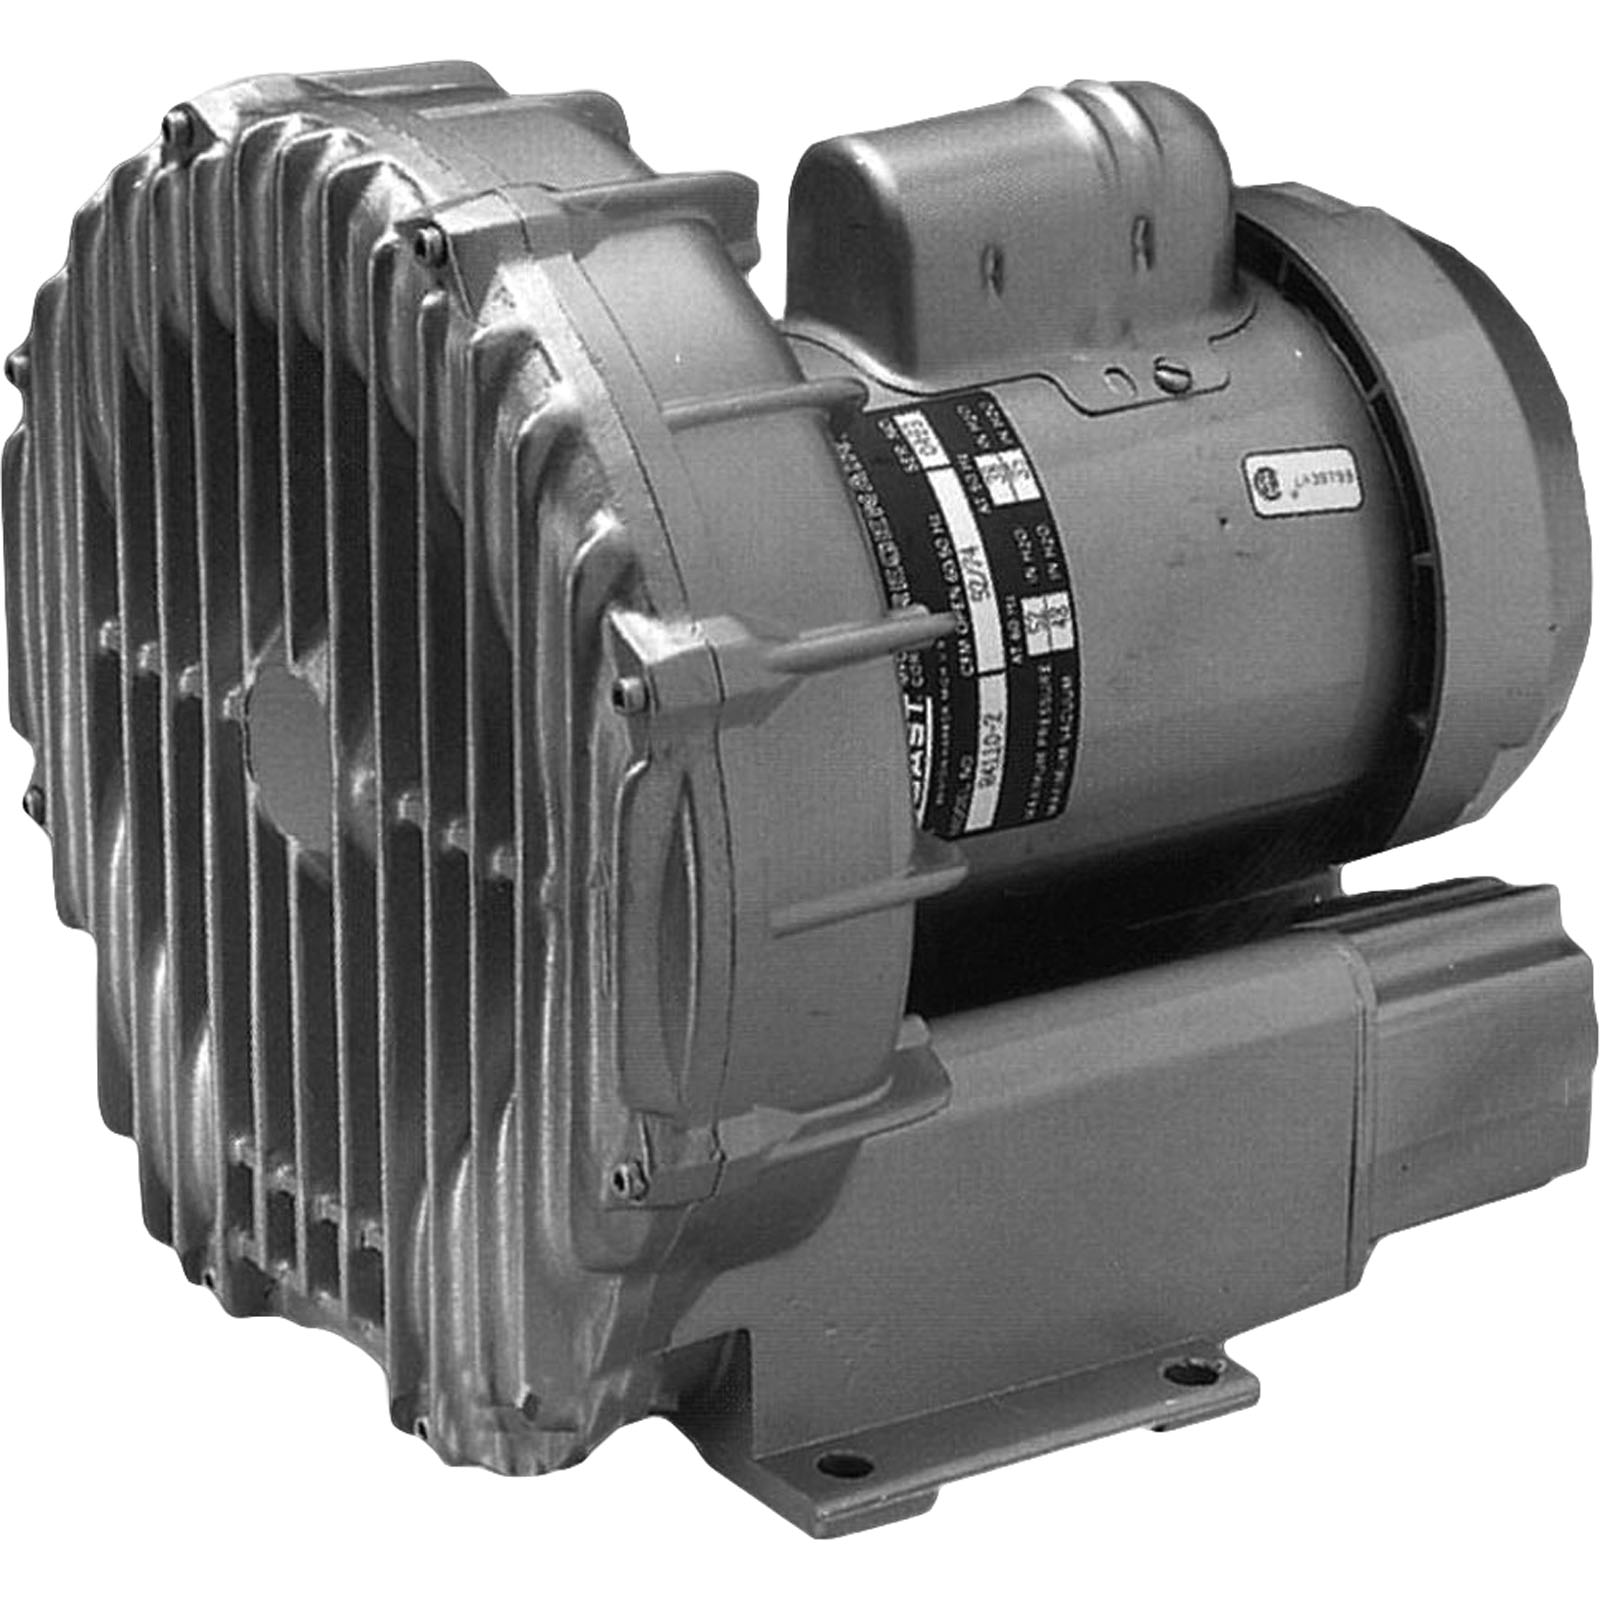 Picture of Commercial Blower, Gast, 1.0hp, 115v/230v, Single Phase